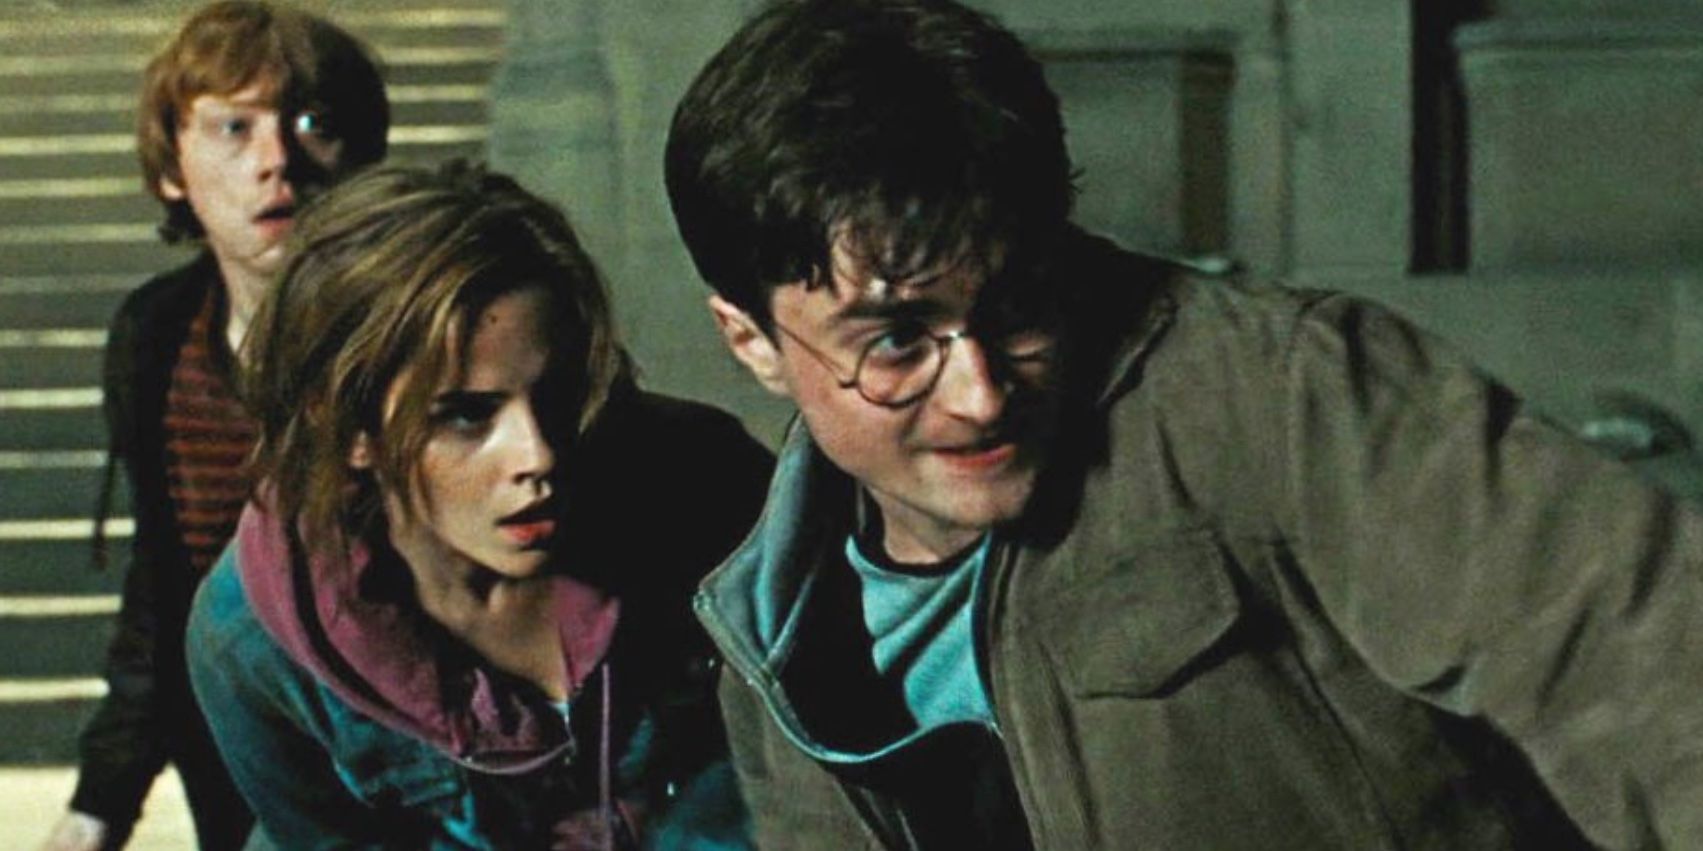 Rupert Grint, Daniel Radcliffe, and Emma Watson in 'Harry Potter and the Deathly Hallows- Part 2' 